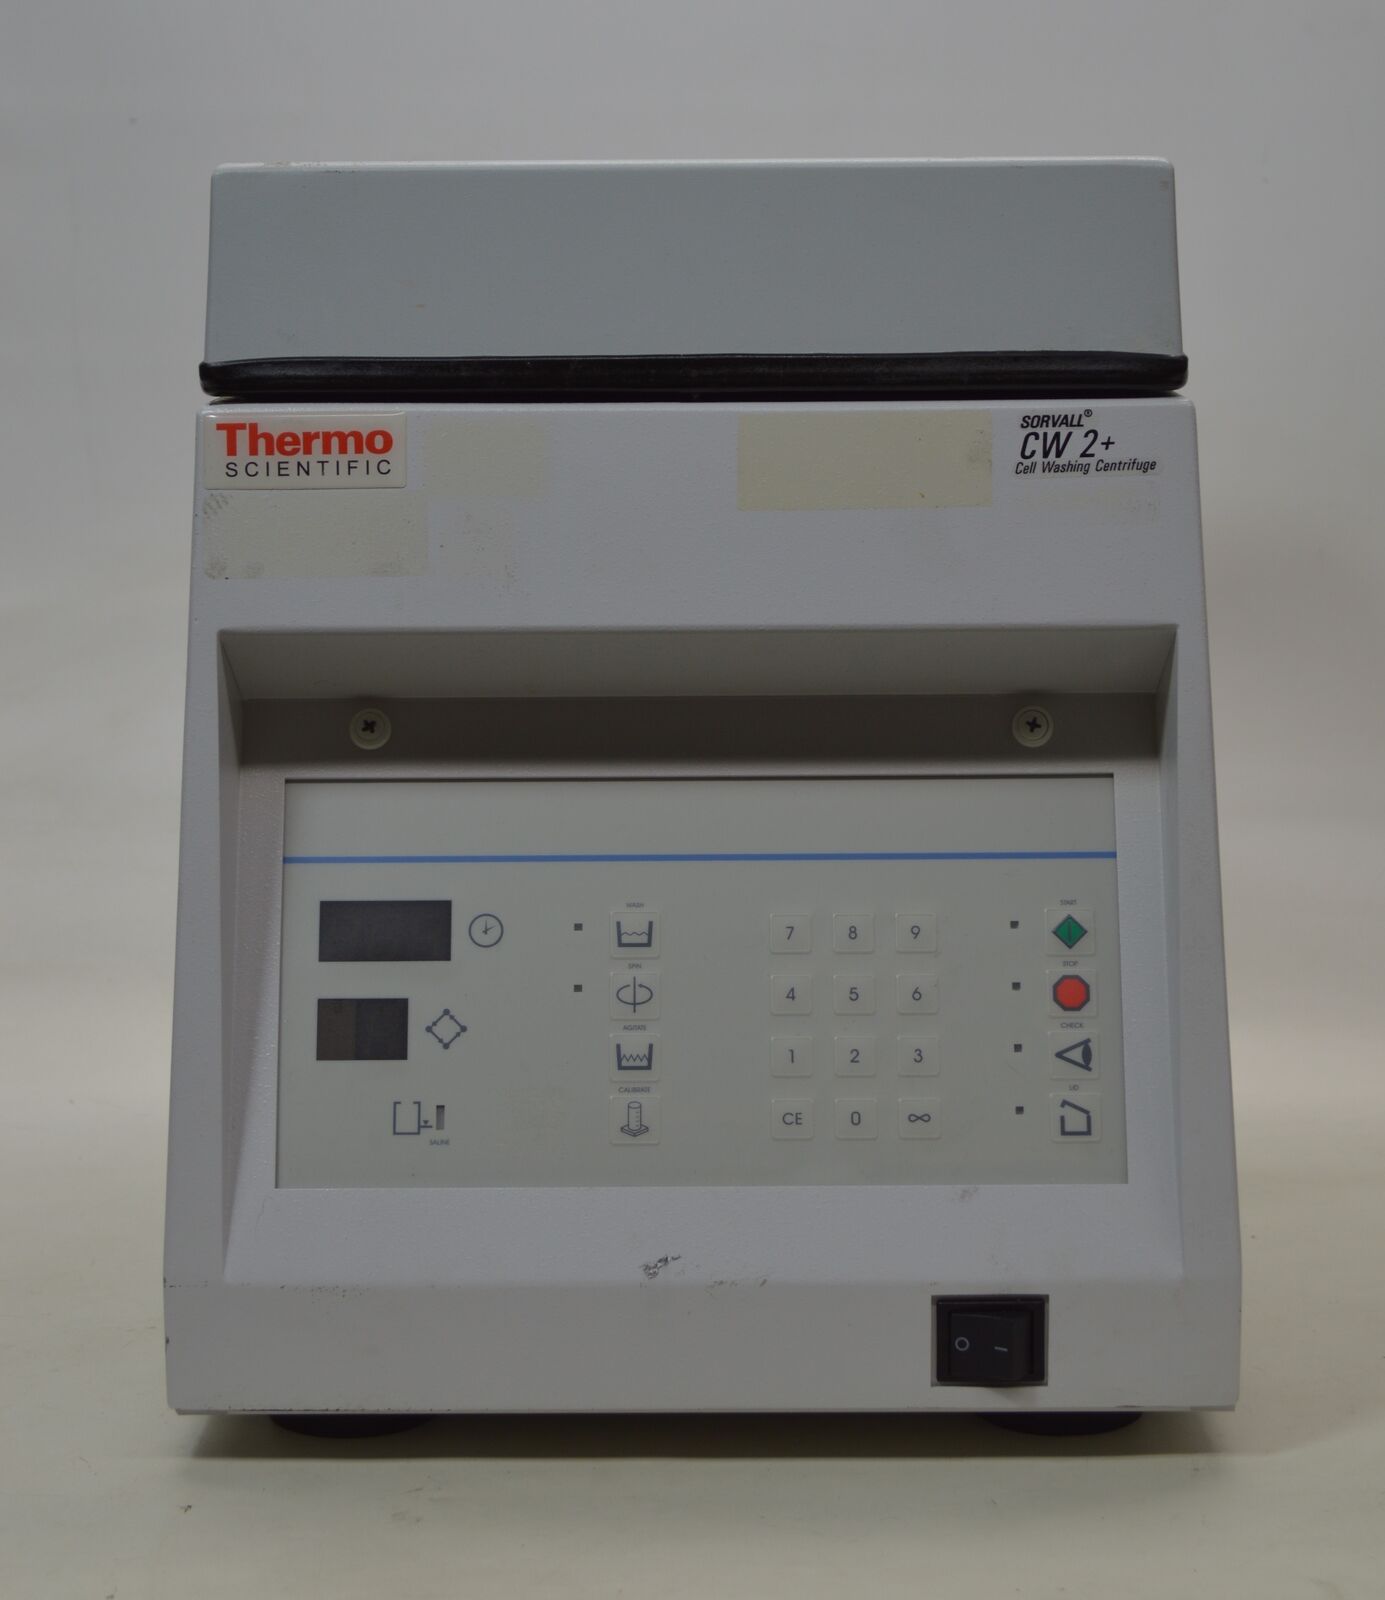 THERMO SCIENTIFIC Sorvall CW2+ Cell Washing Centrifuge